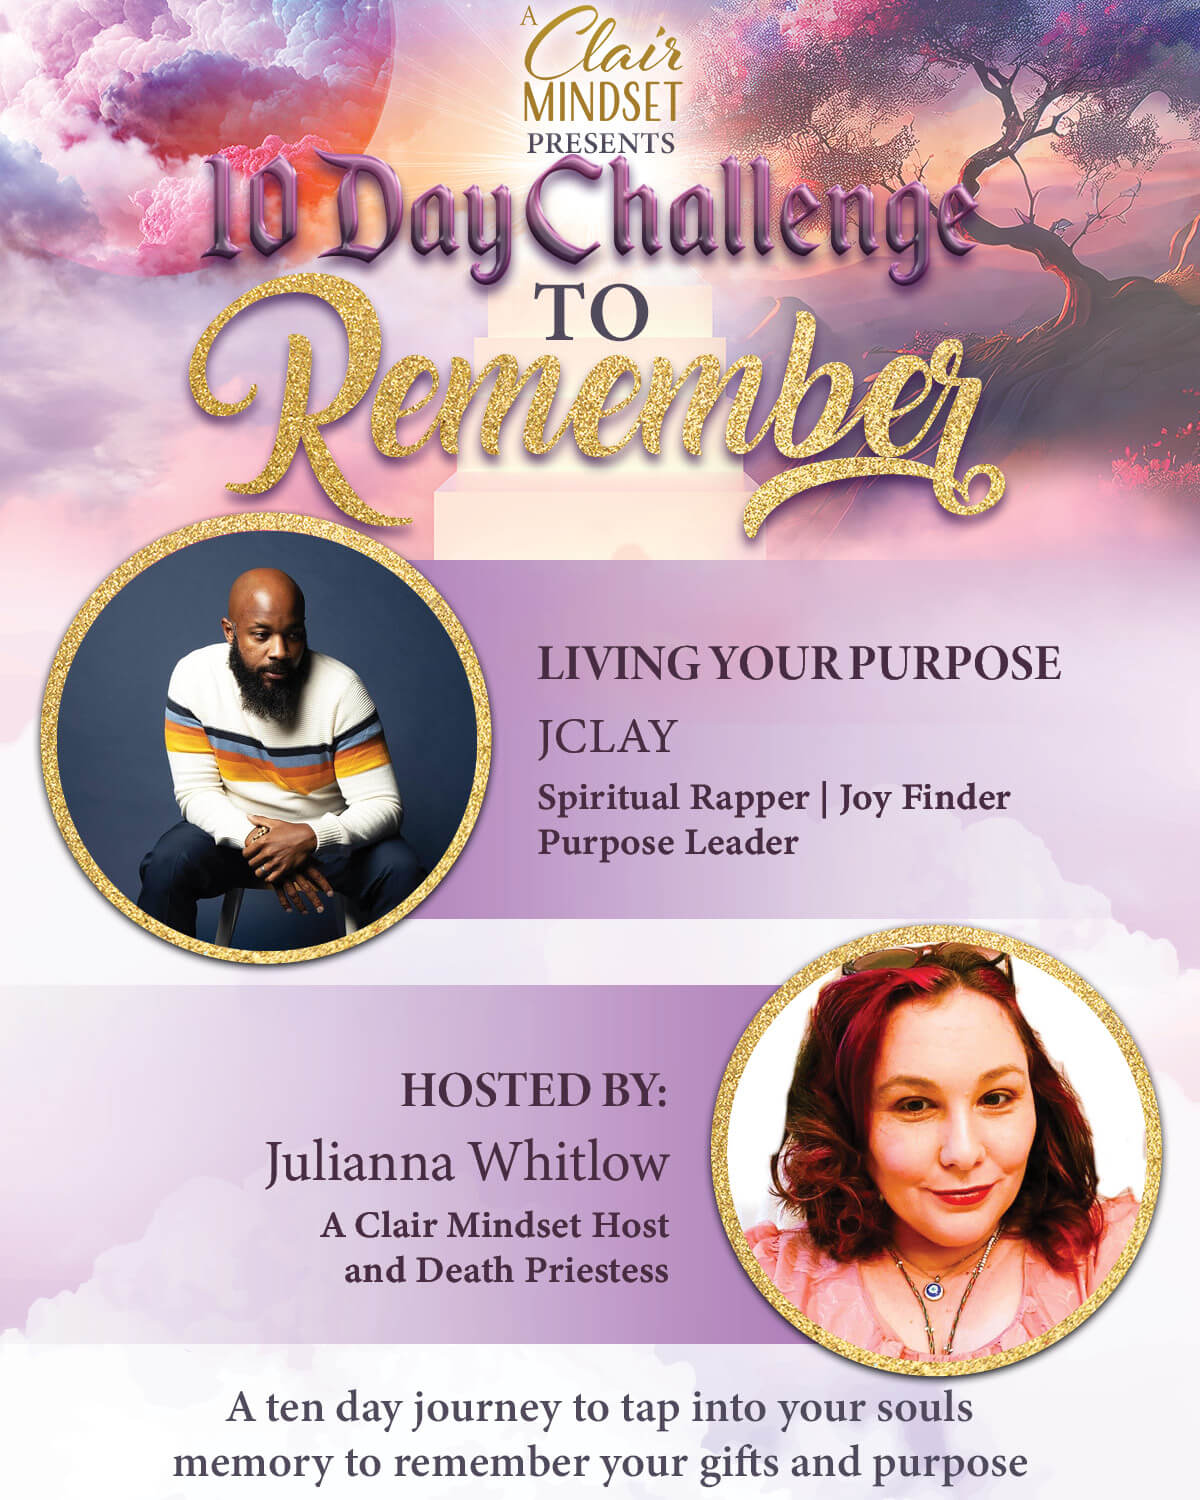 A Clair Mindset Presents: 10 Day Challenge to Remember. Living Your Purpose with JClay